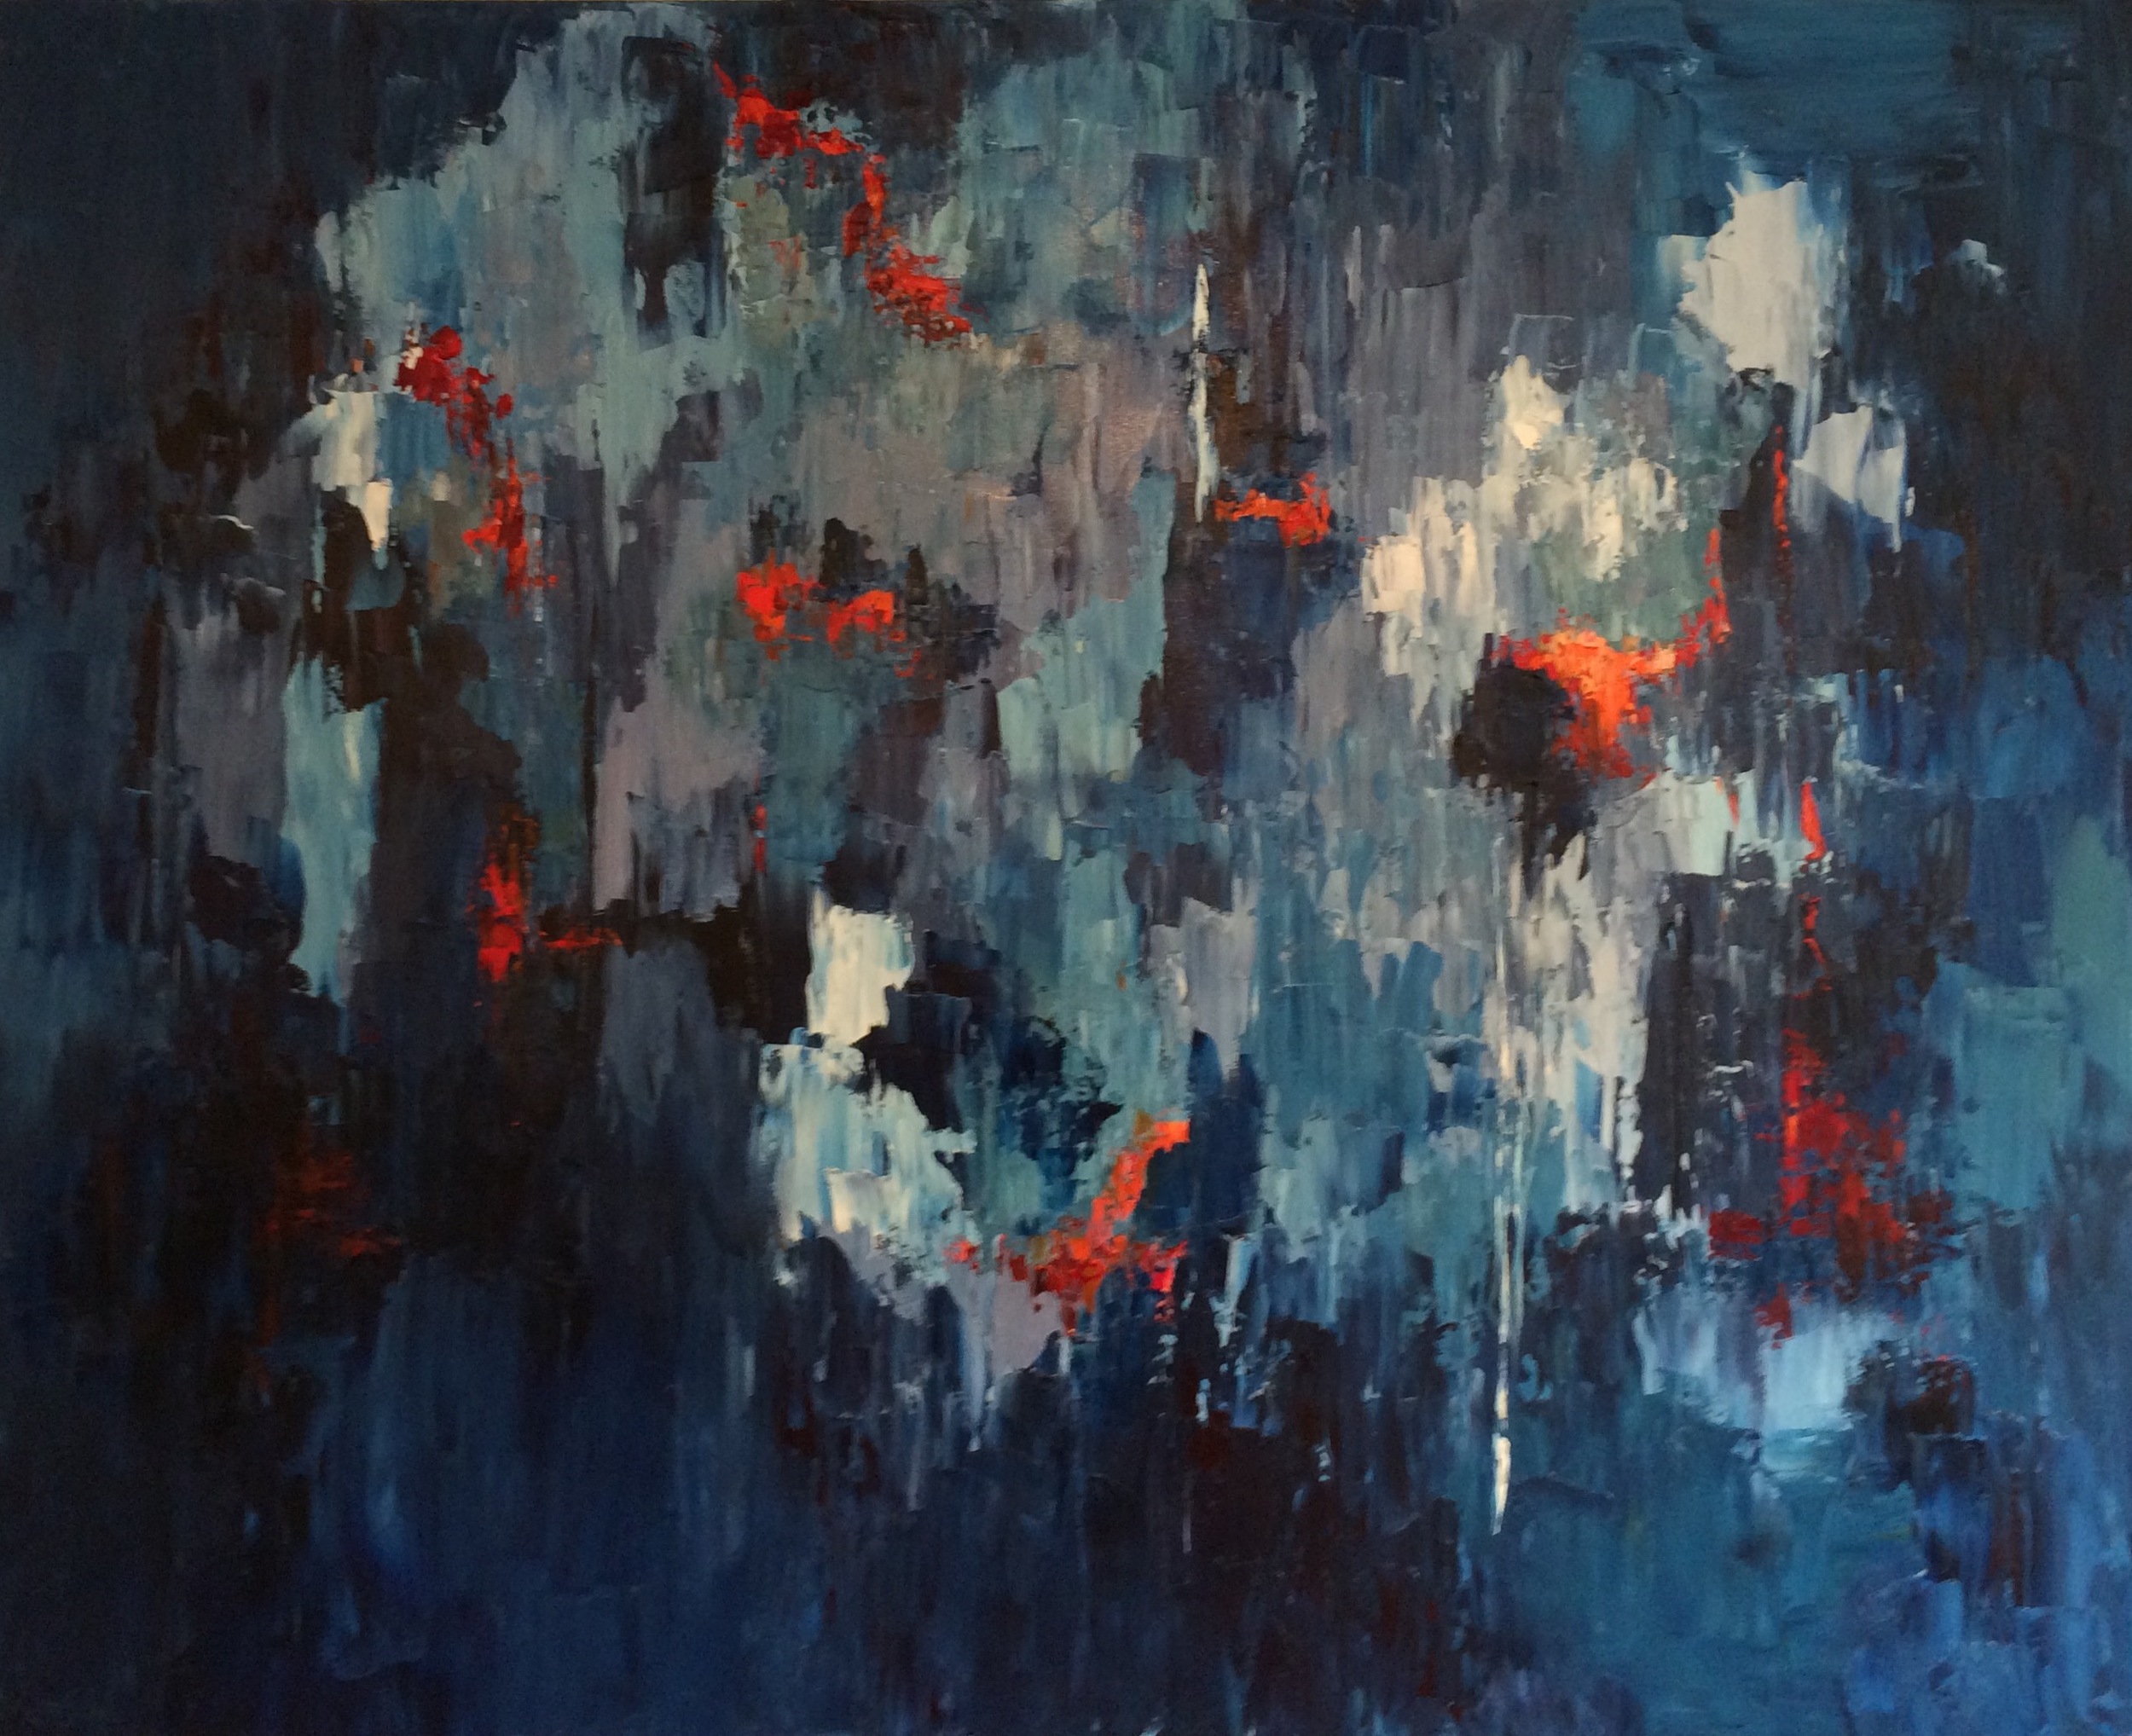 Jewels in the Darkness, oil on canvas, 48"x60" SOLD